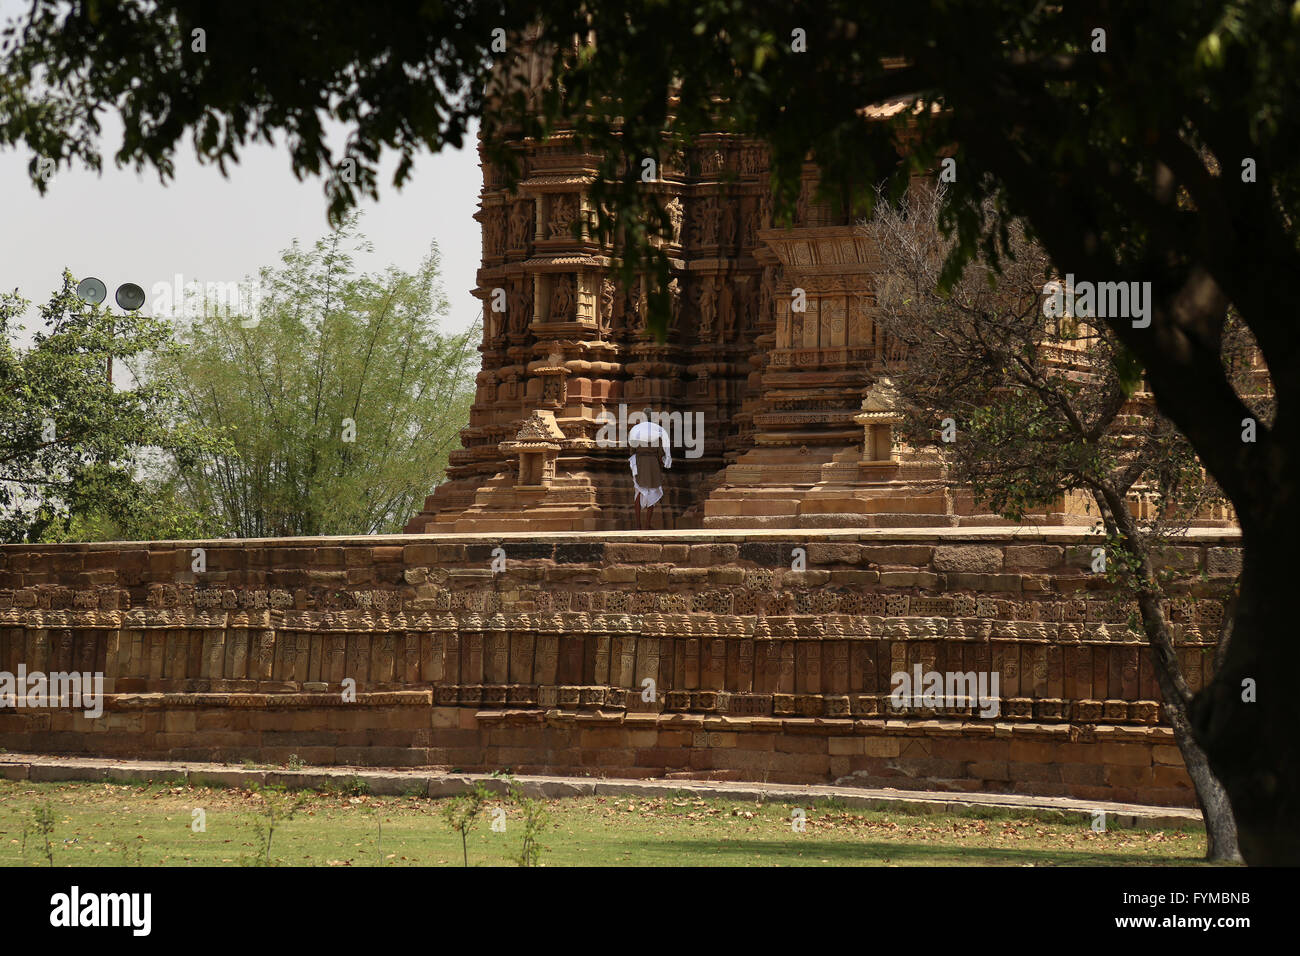 Believers in the temple area of Khajuraho Stock Photo